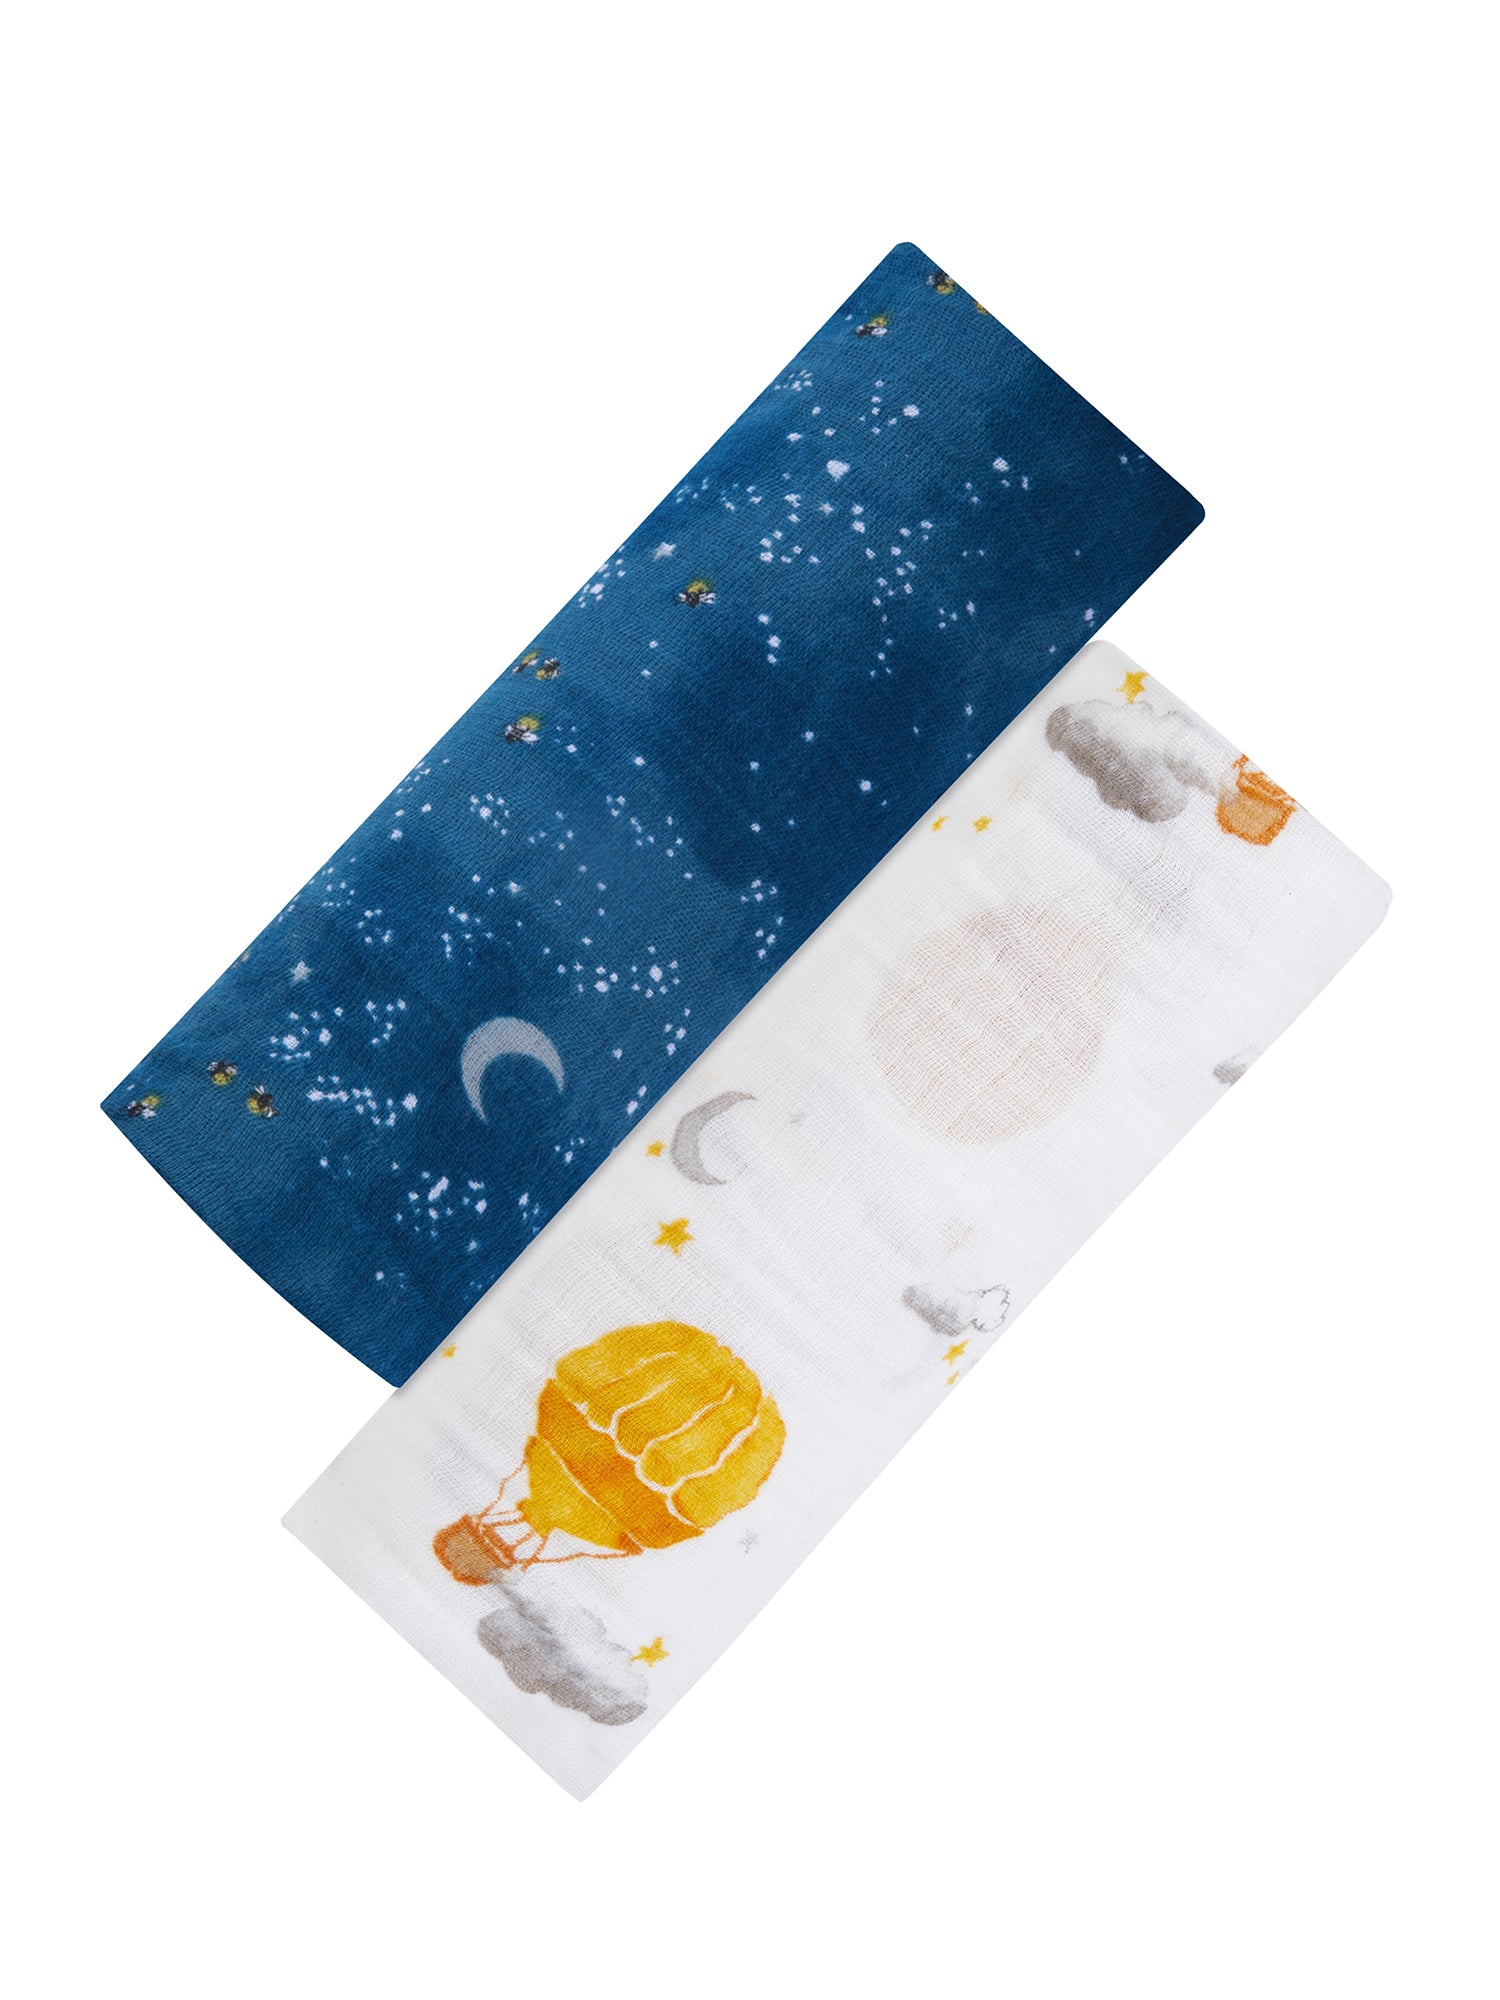 Organic Swaddle Set - Fly Me To The Moon (Starry Night & Hot Air Balloon)